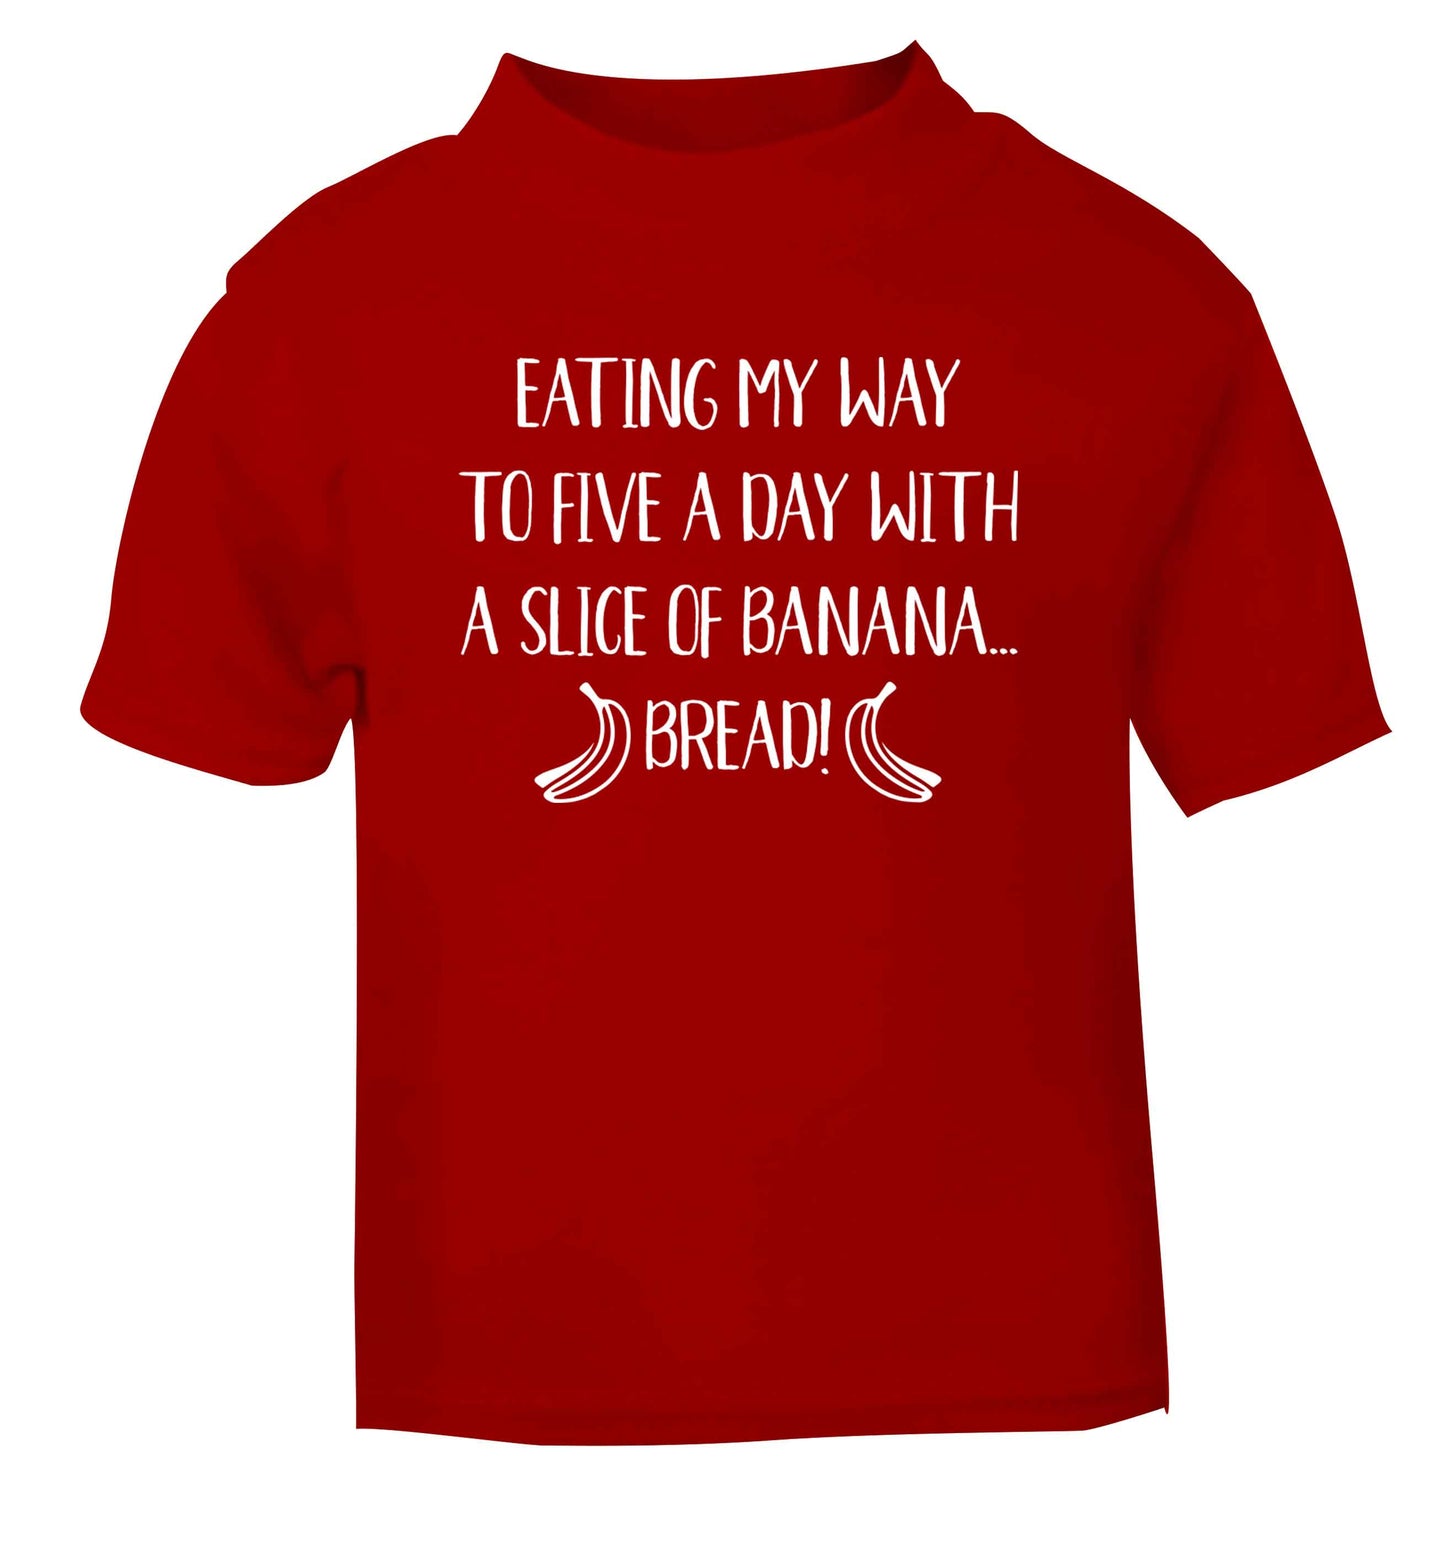 Eating my way to five a day with a slice of banana bread red Baby Toddler Tshirt 2 Years